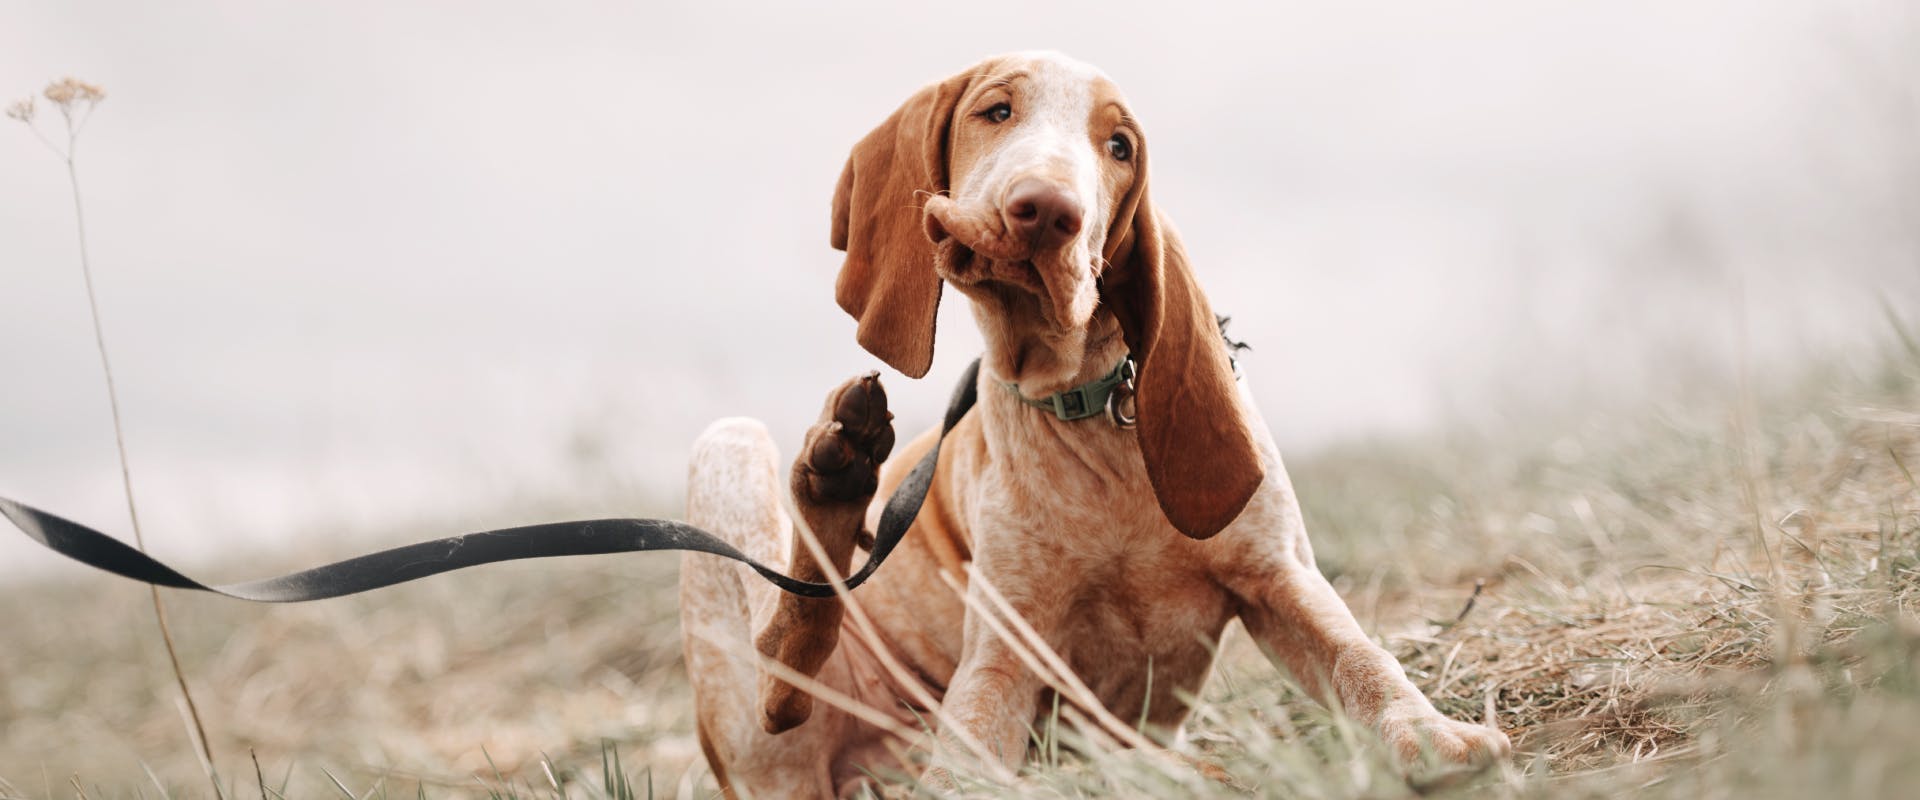 a basset hound sitting in a field of long grass scratching its face with its back paw